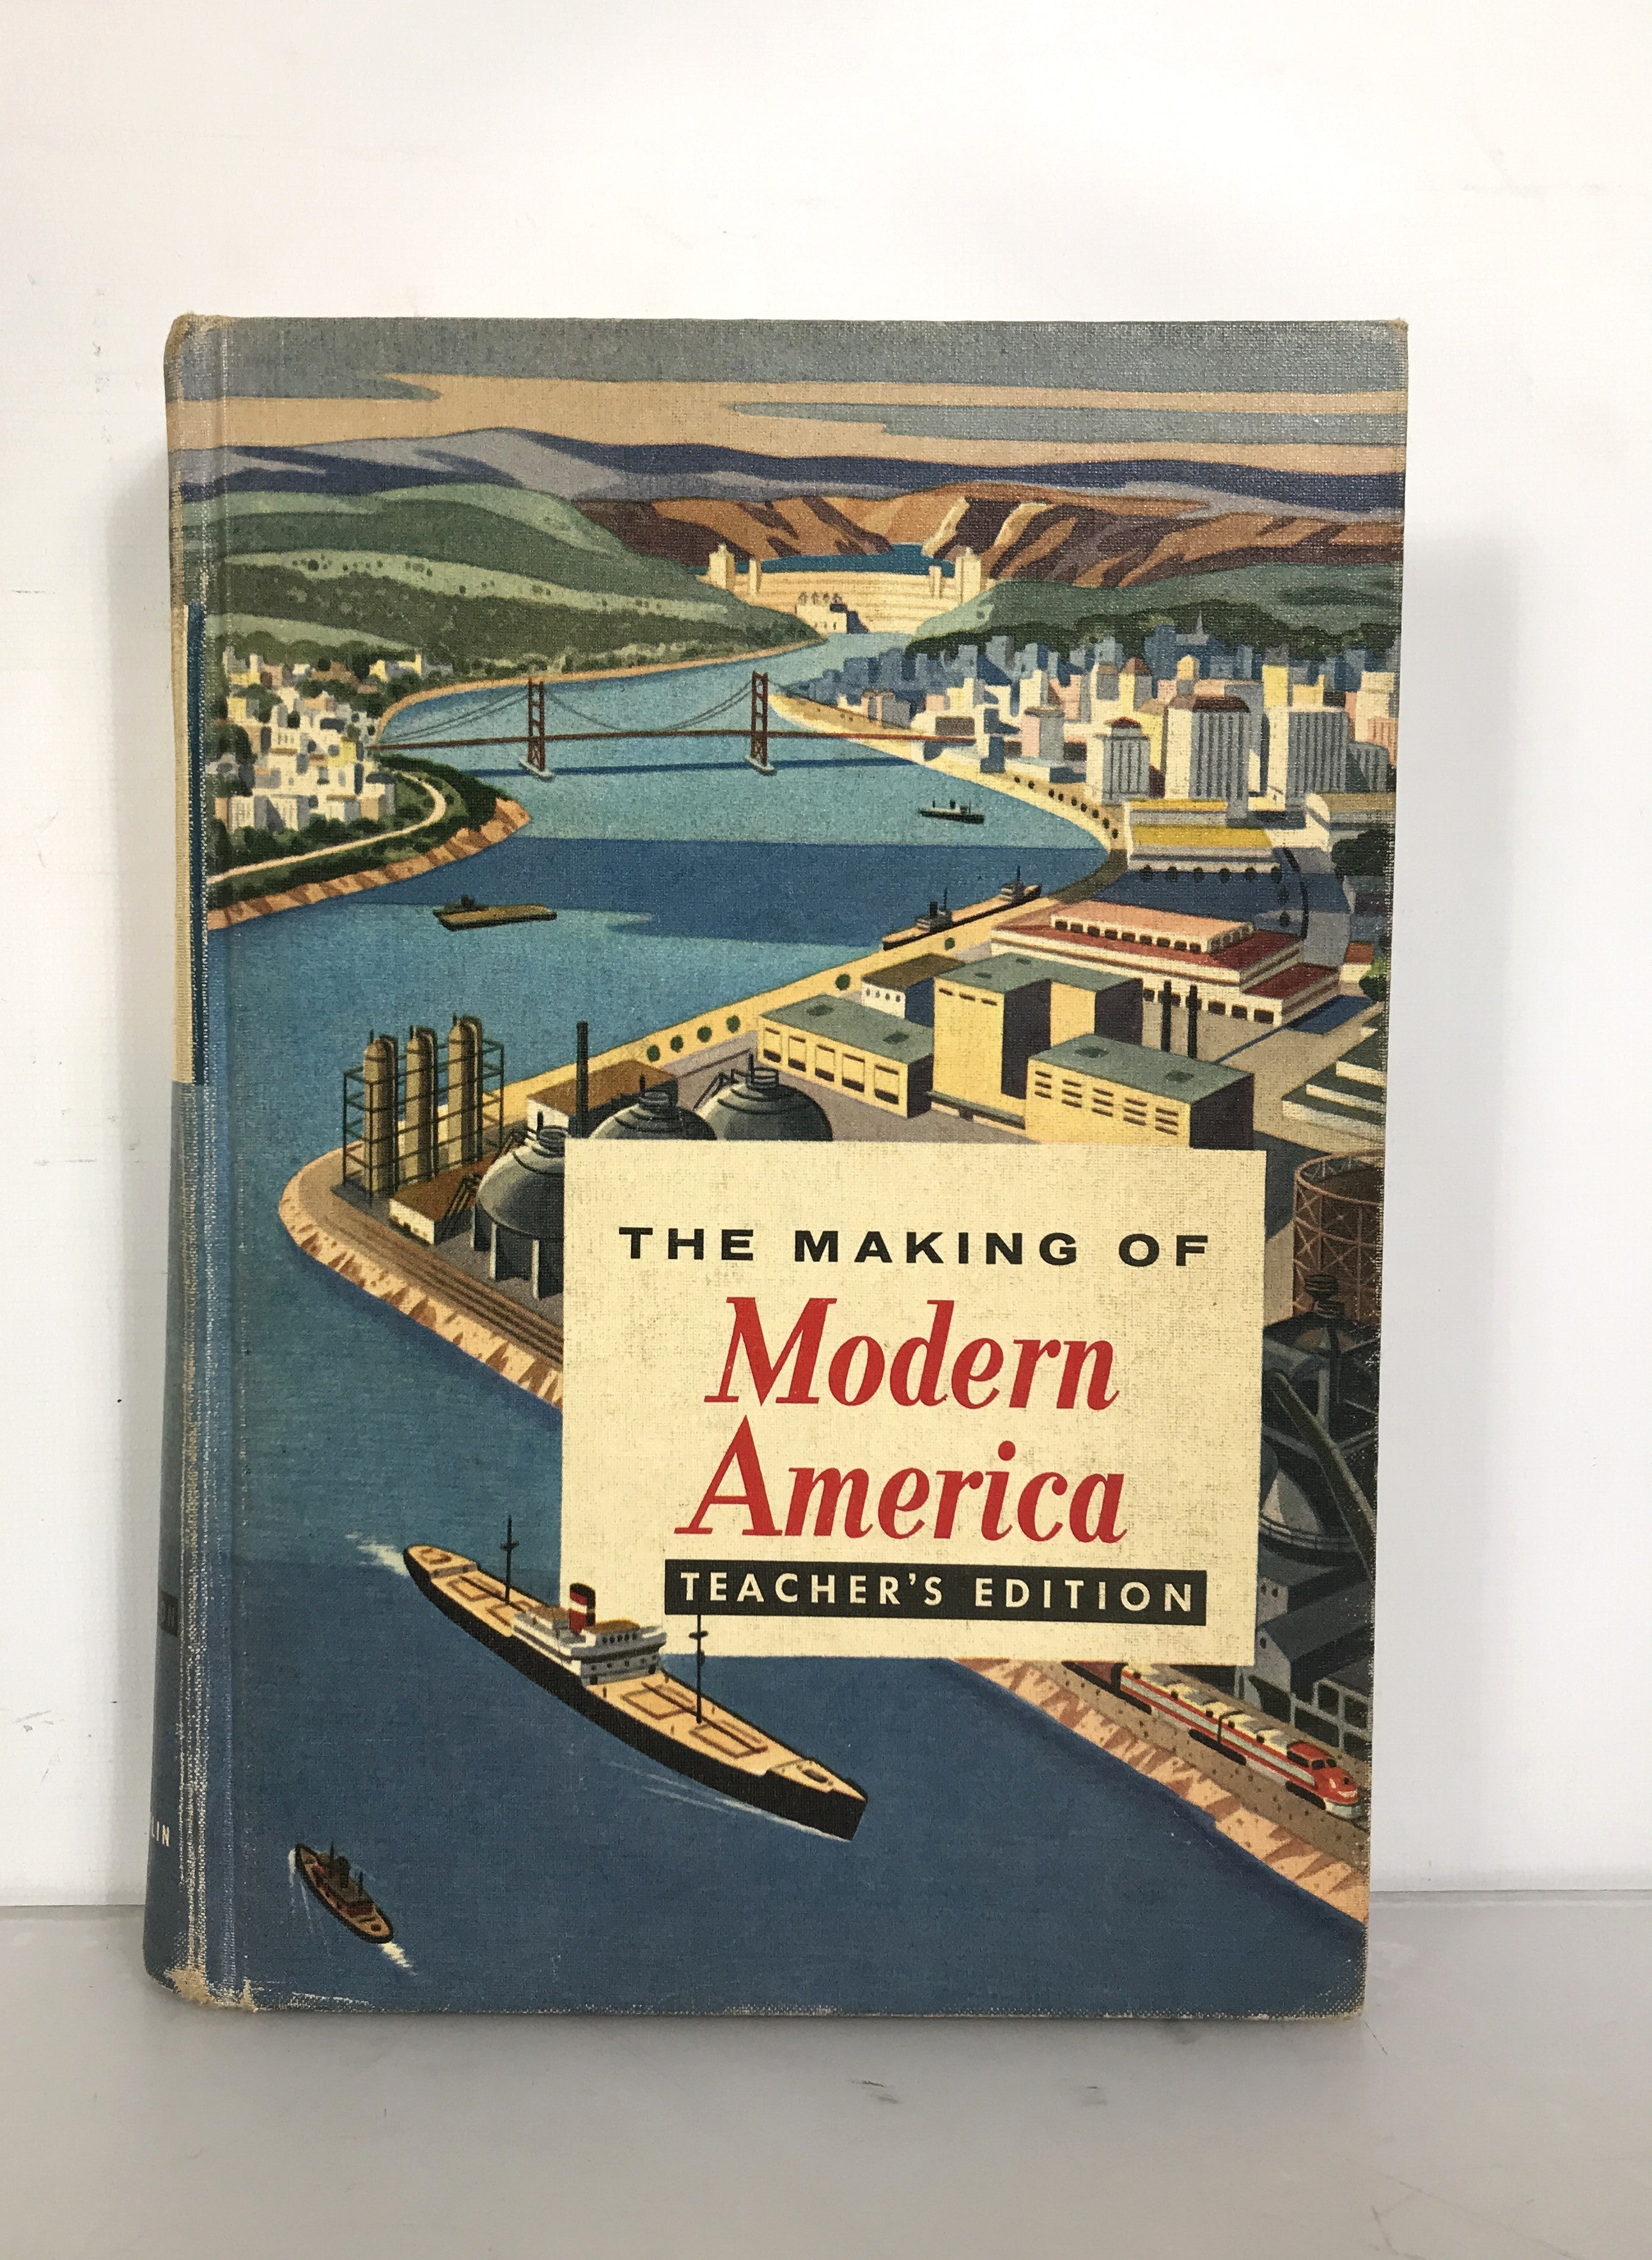 Lot of 3 Social Studies Teacher's Books The Making of Modern America with Key and Challenges for a Free People 1964 HC SC